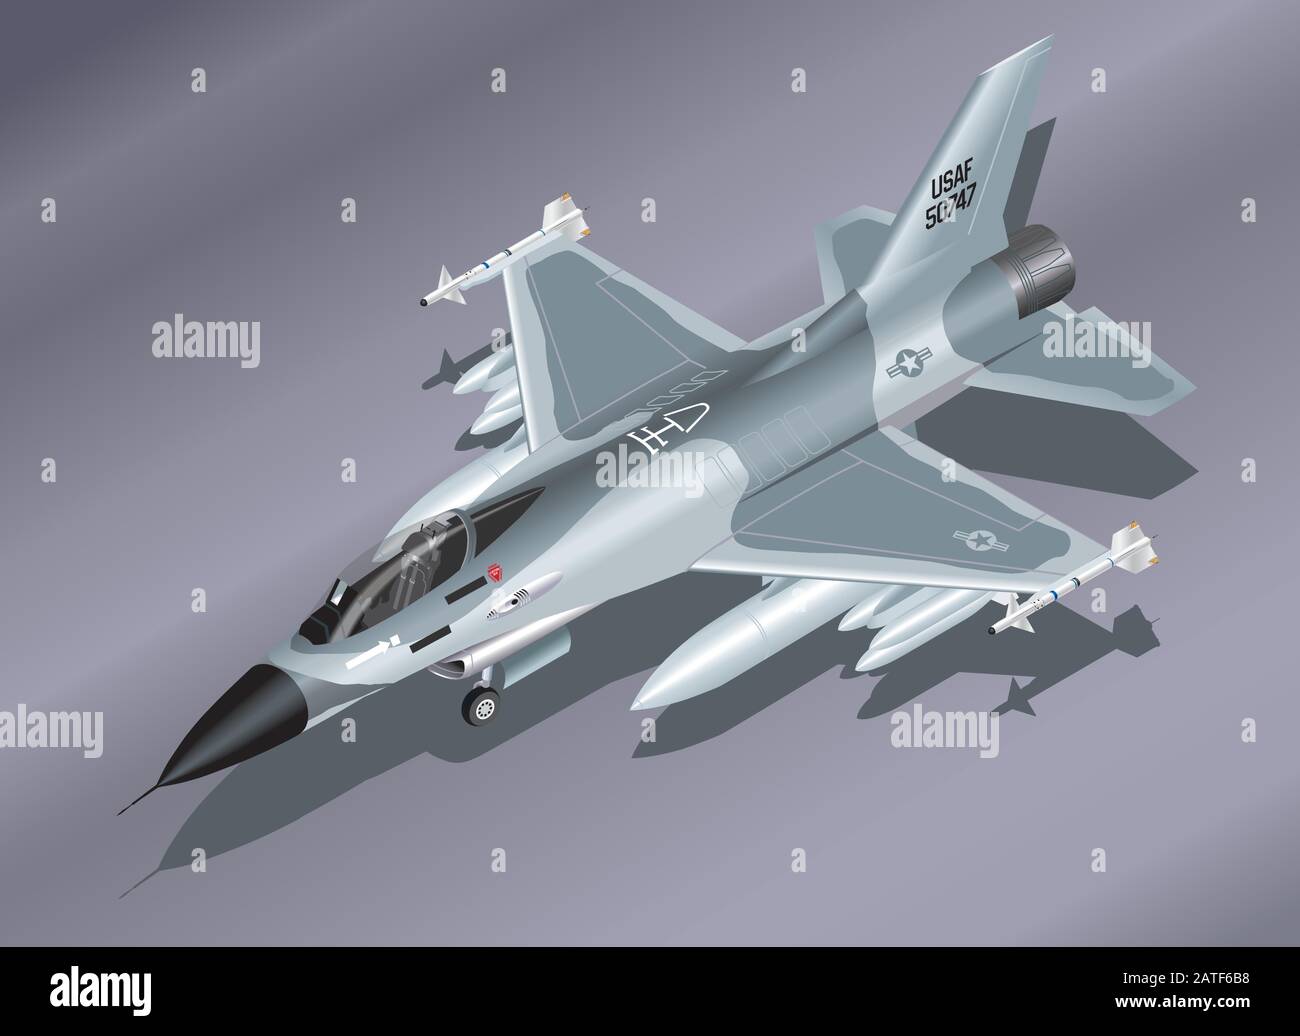 Detailed Isometric Vector Illustration of an F-16 Fighter Jet Parked on the Ground Stock Vector